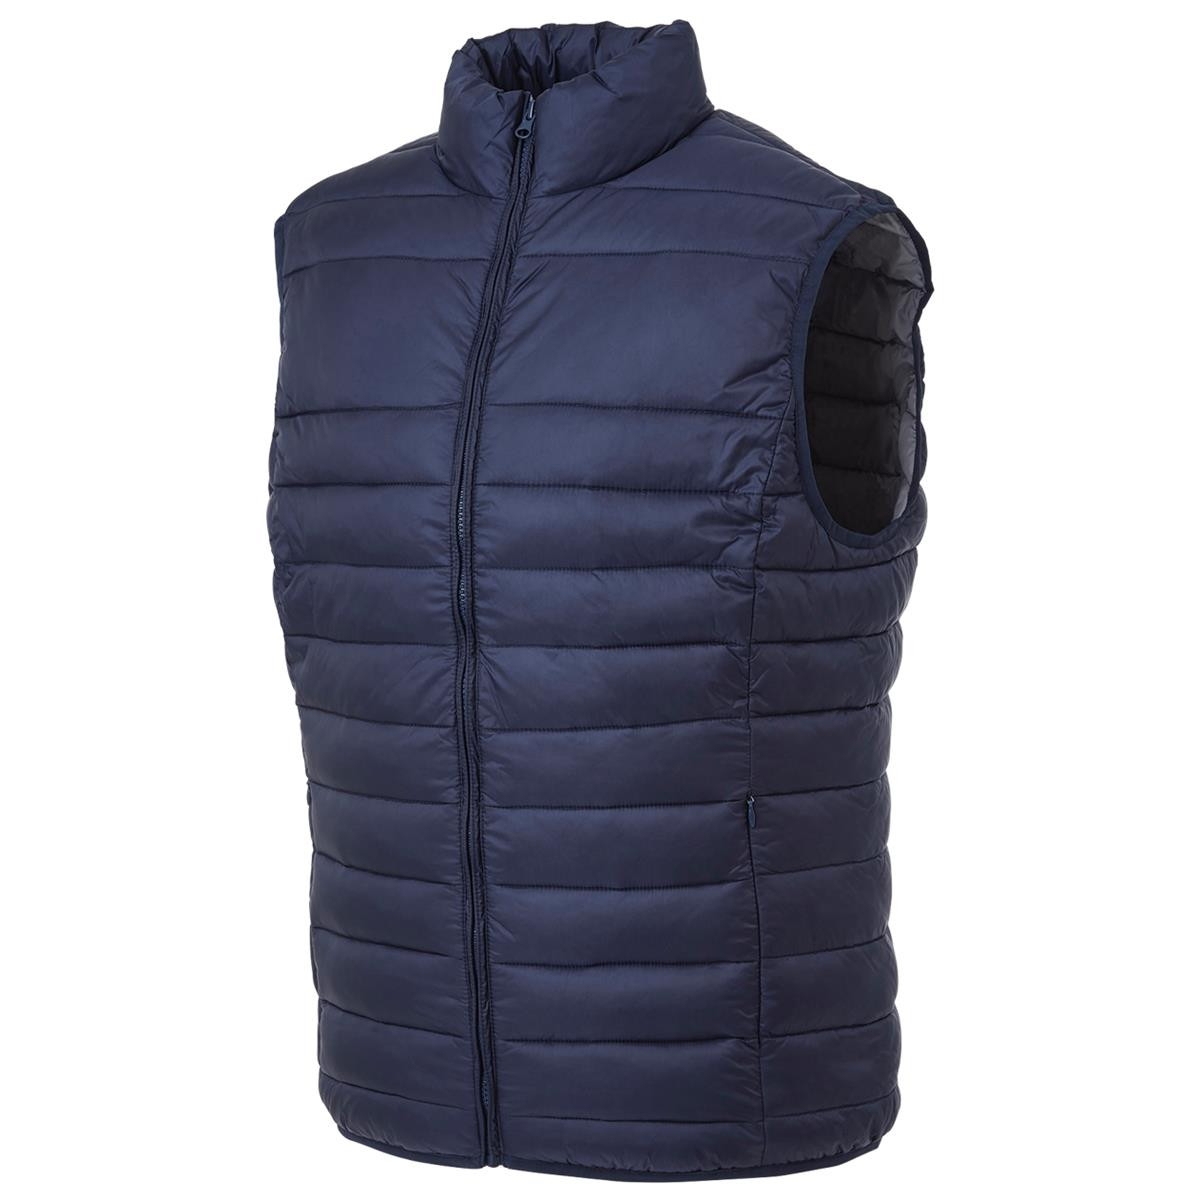 The Puffer Vest - Global CMA